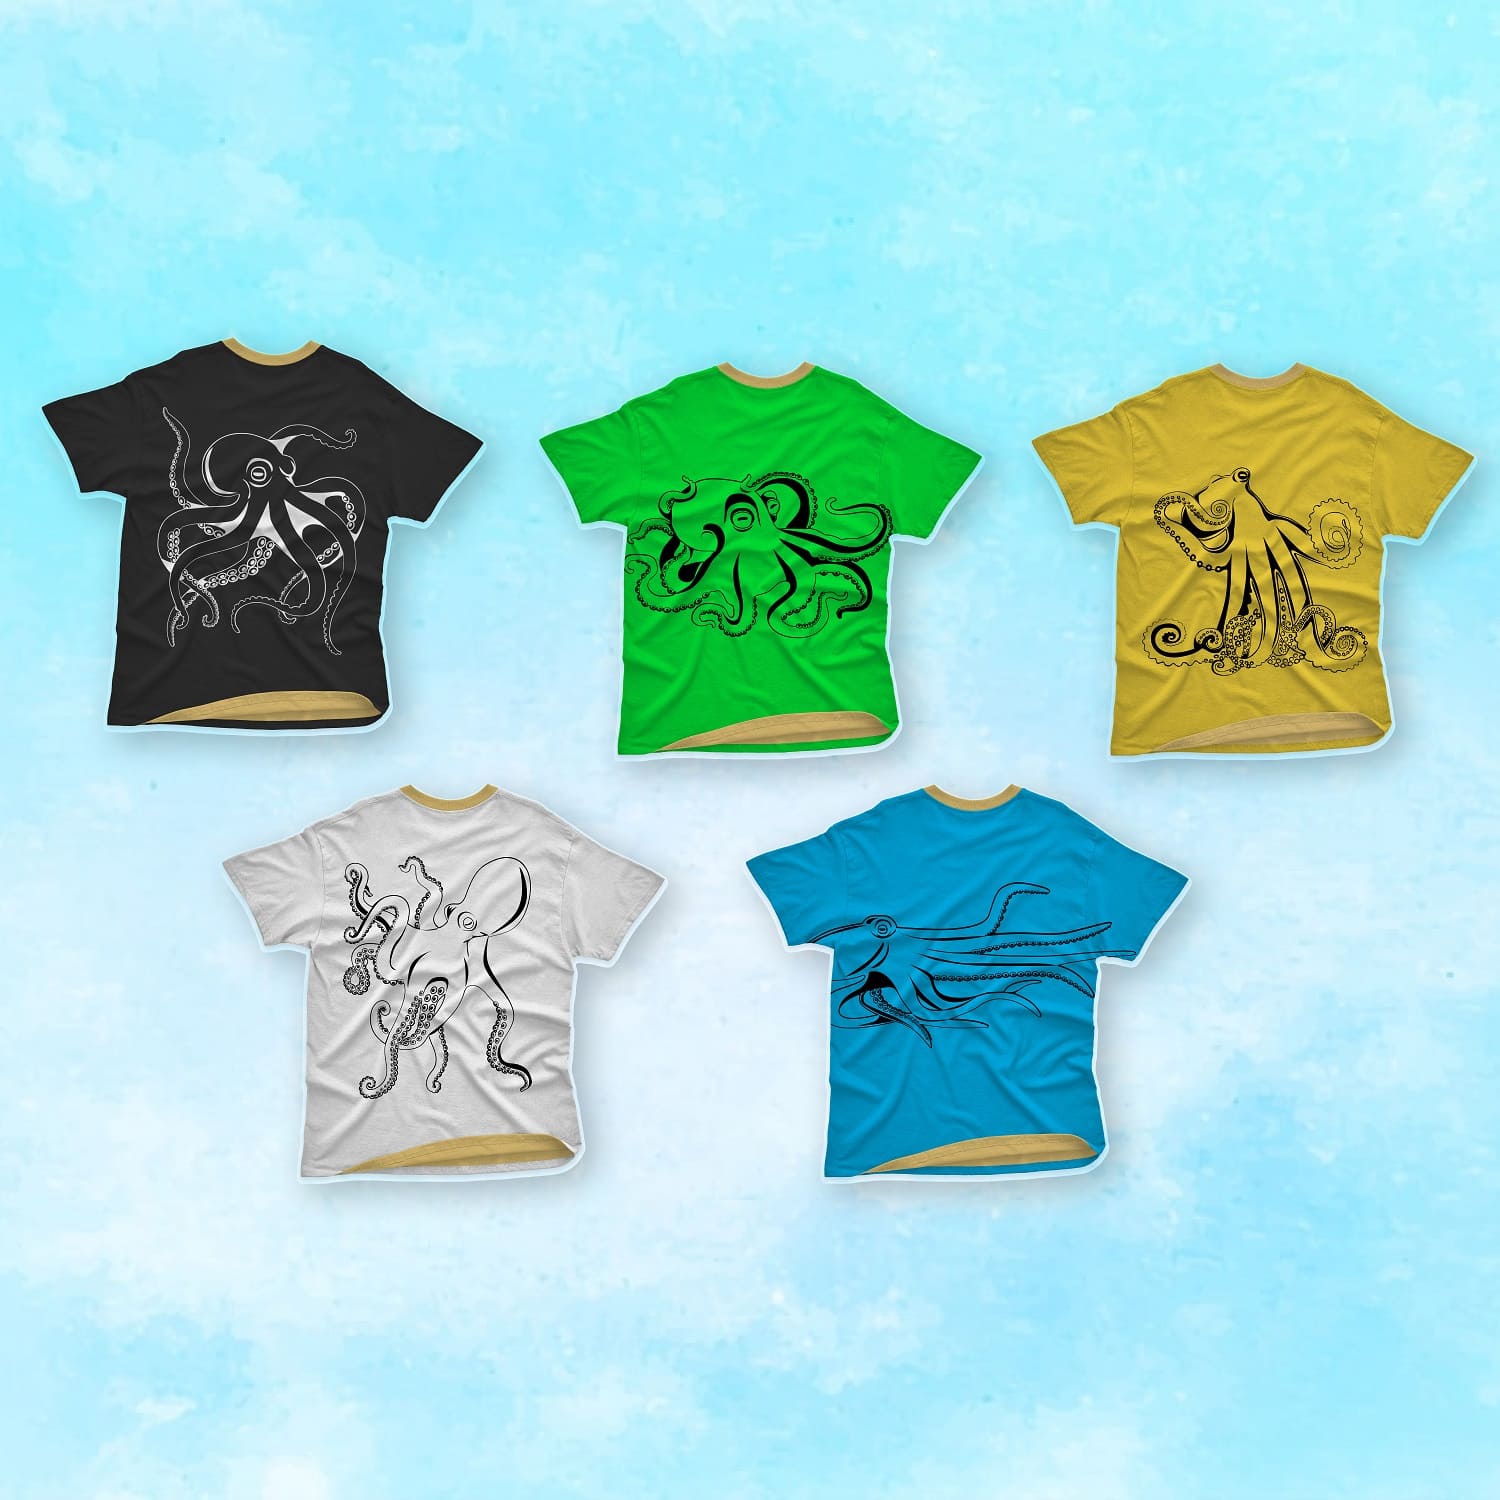 A set of five colorful t-shirts featuring an octopus.